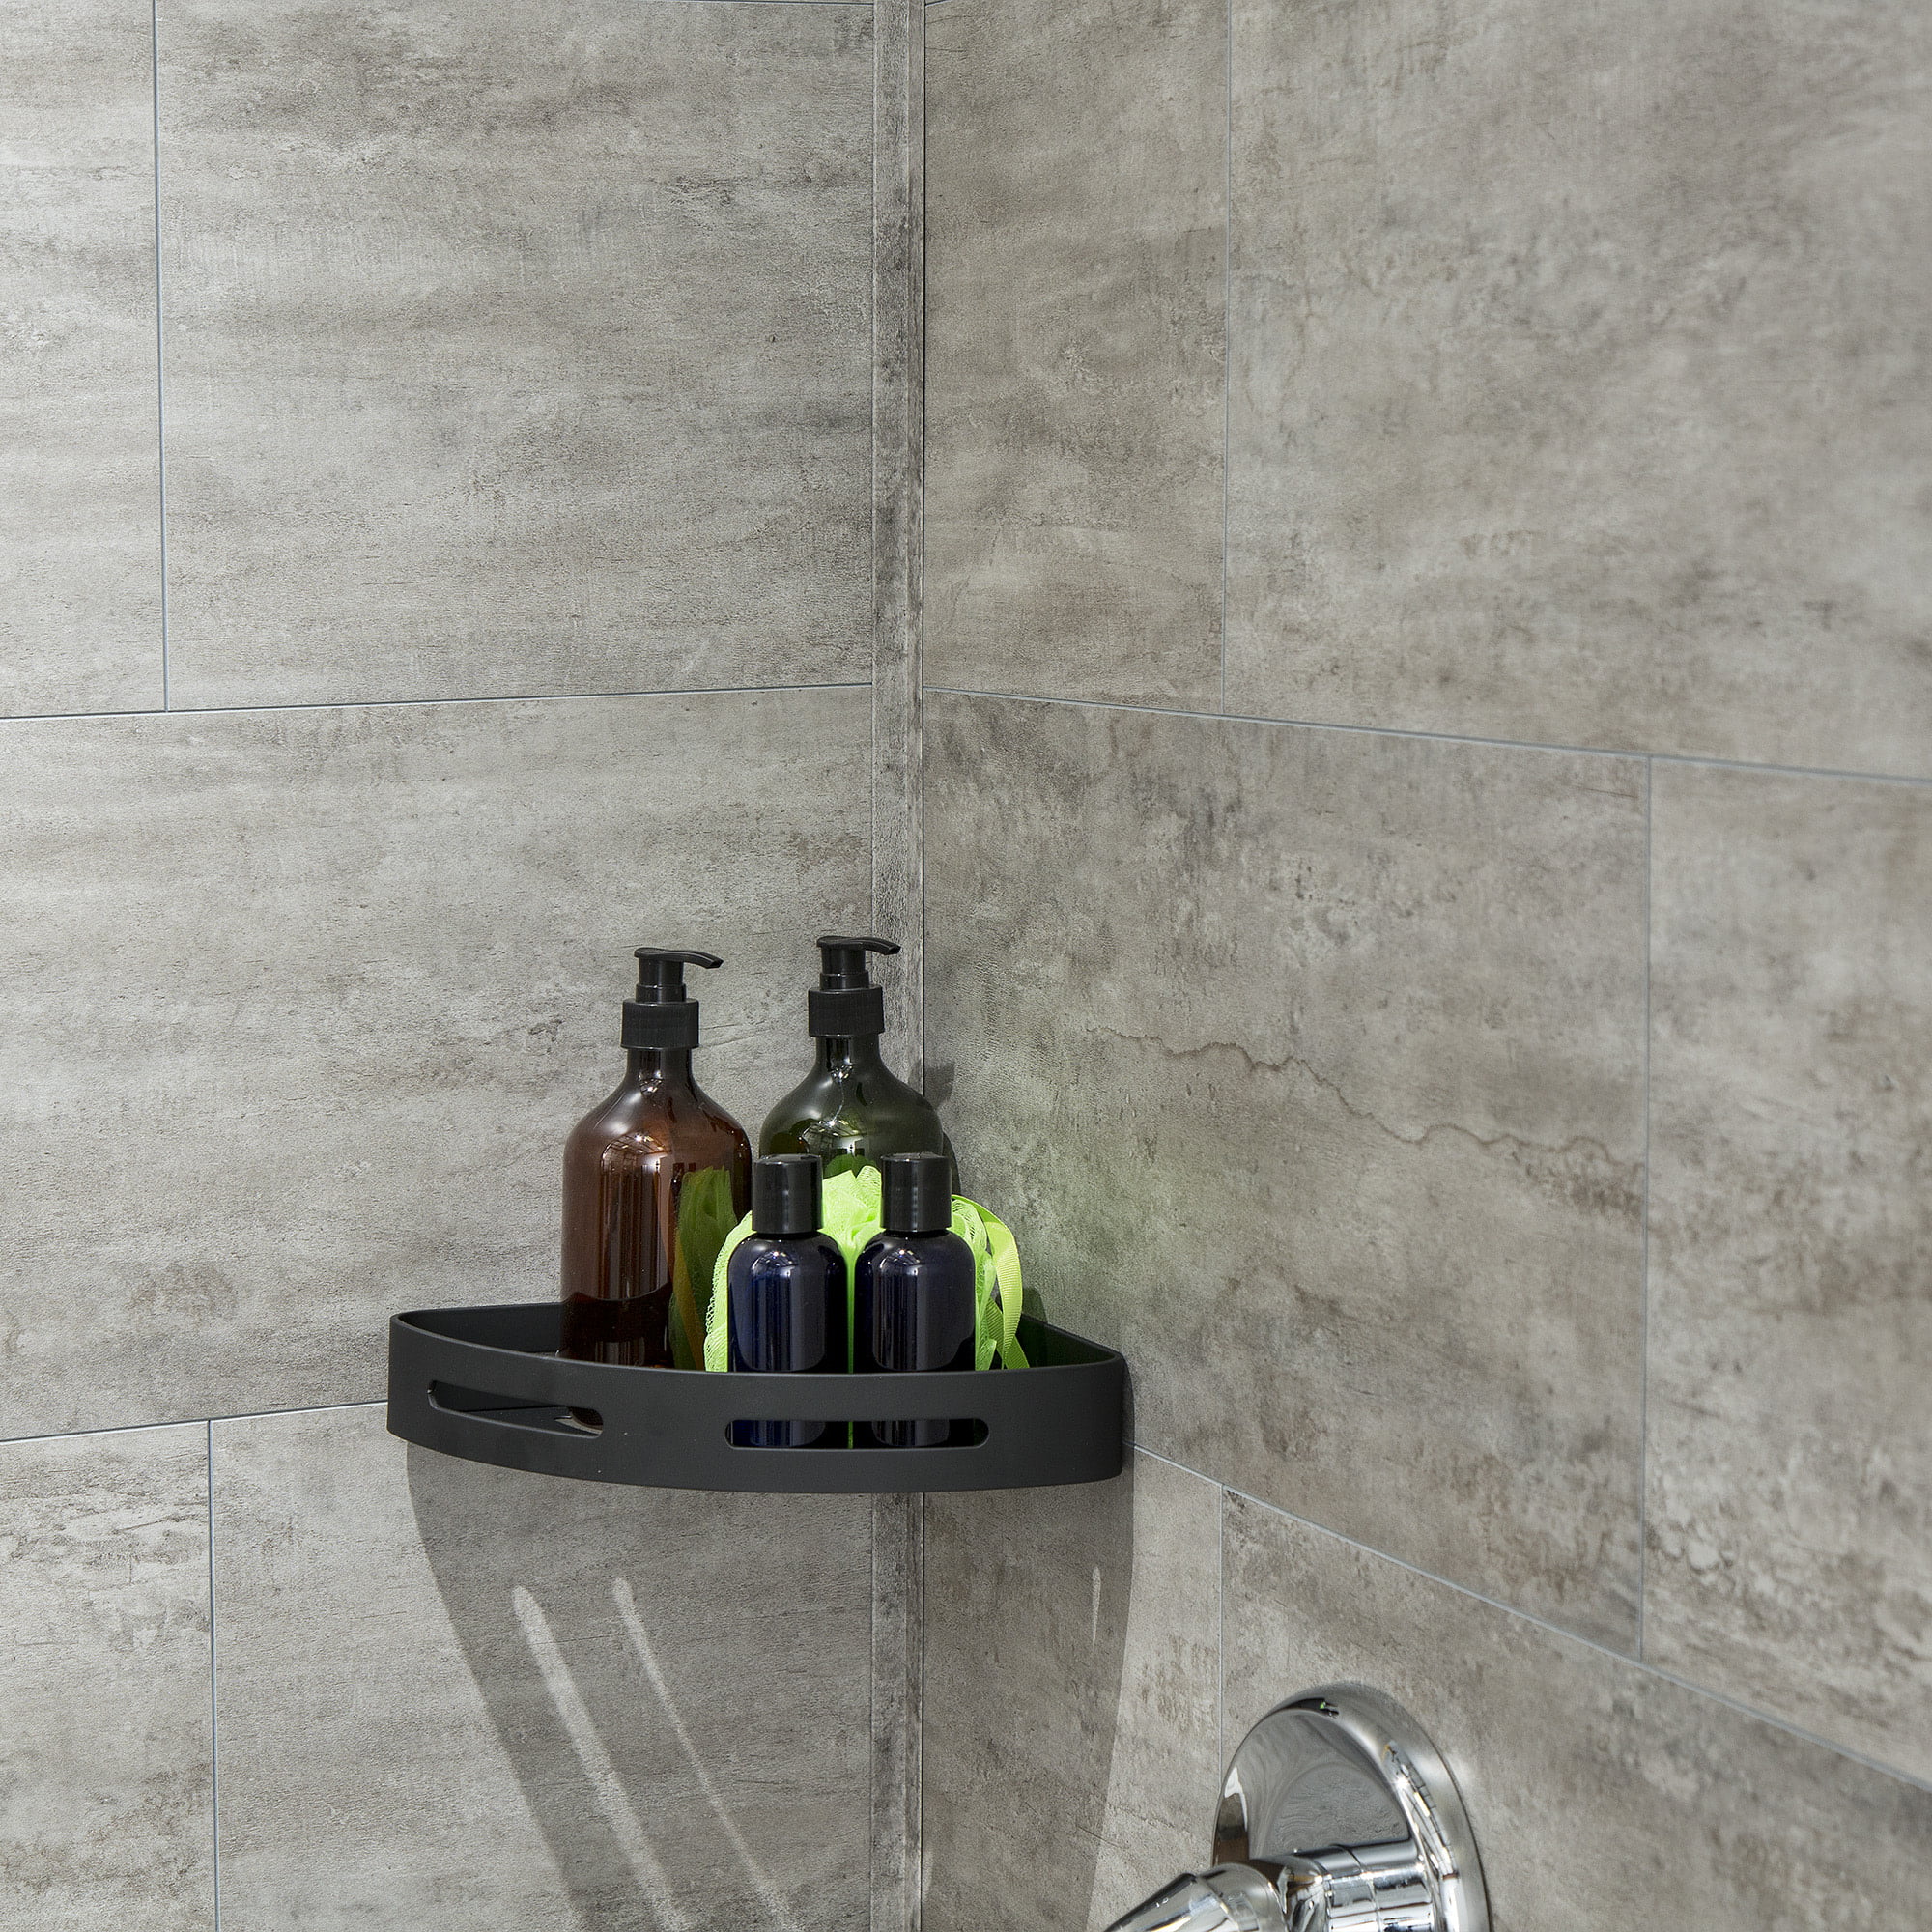 Palisade 23.2 in. x 11.1 in. Interlocking Vinyl Tile Shower and Tub Surround Kit in Wintry Mix